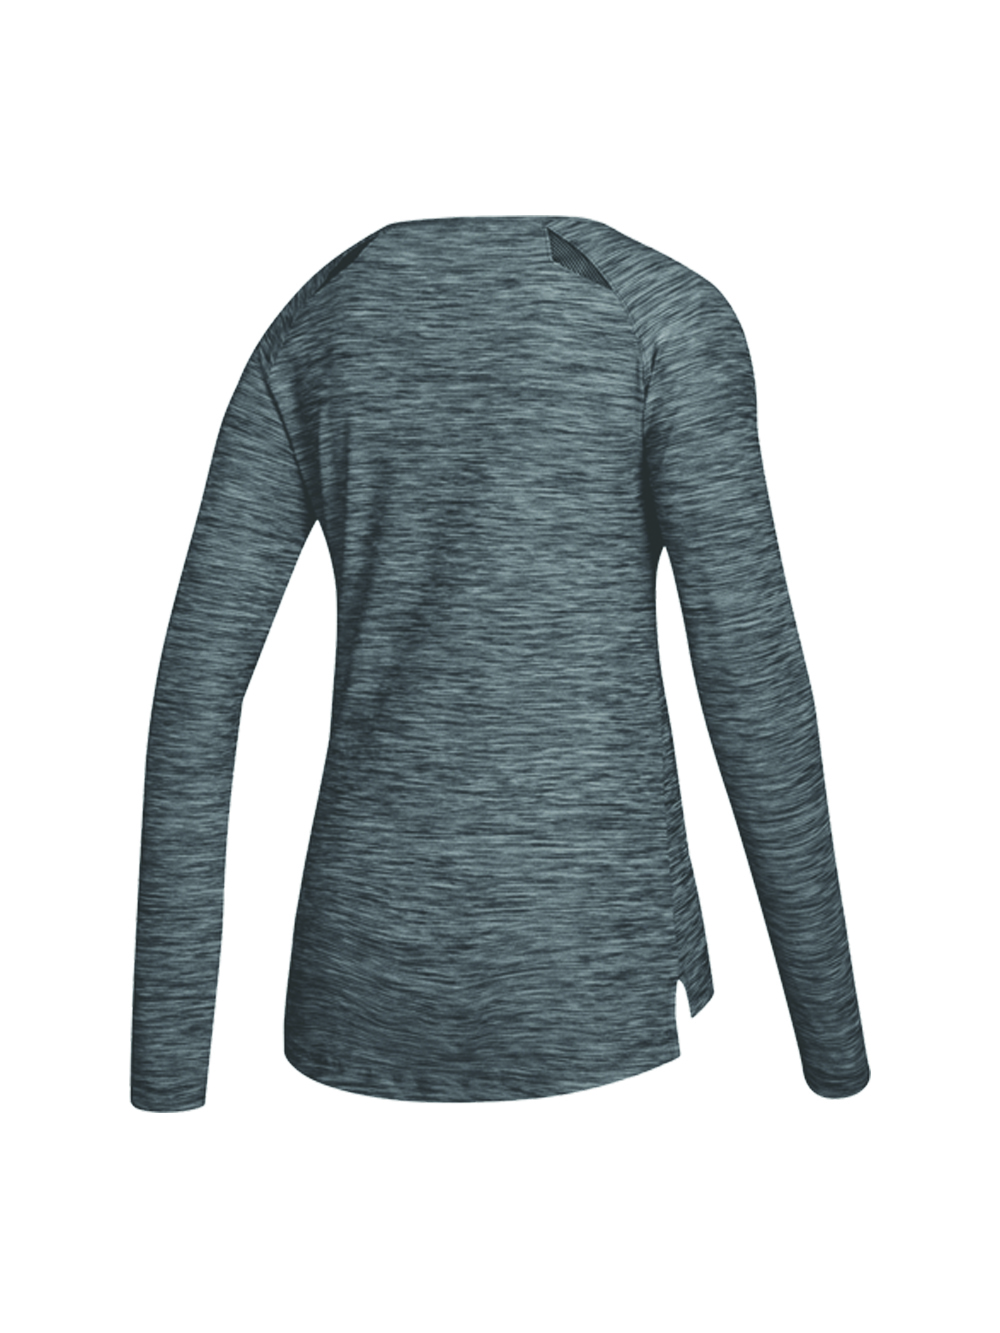 Adidas Hi-Lo Long Sleeve Jersey | Midwest Volleyball Warehouse